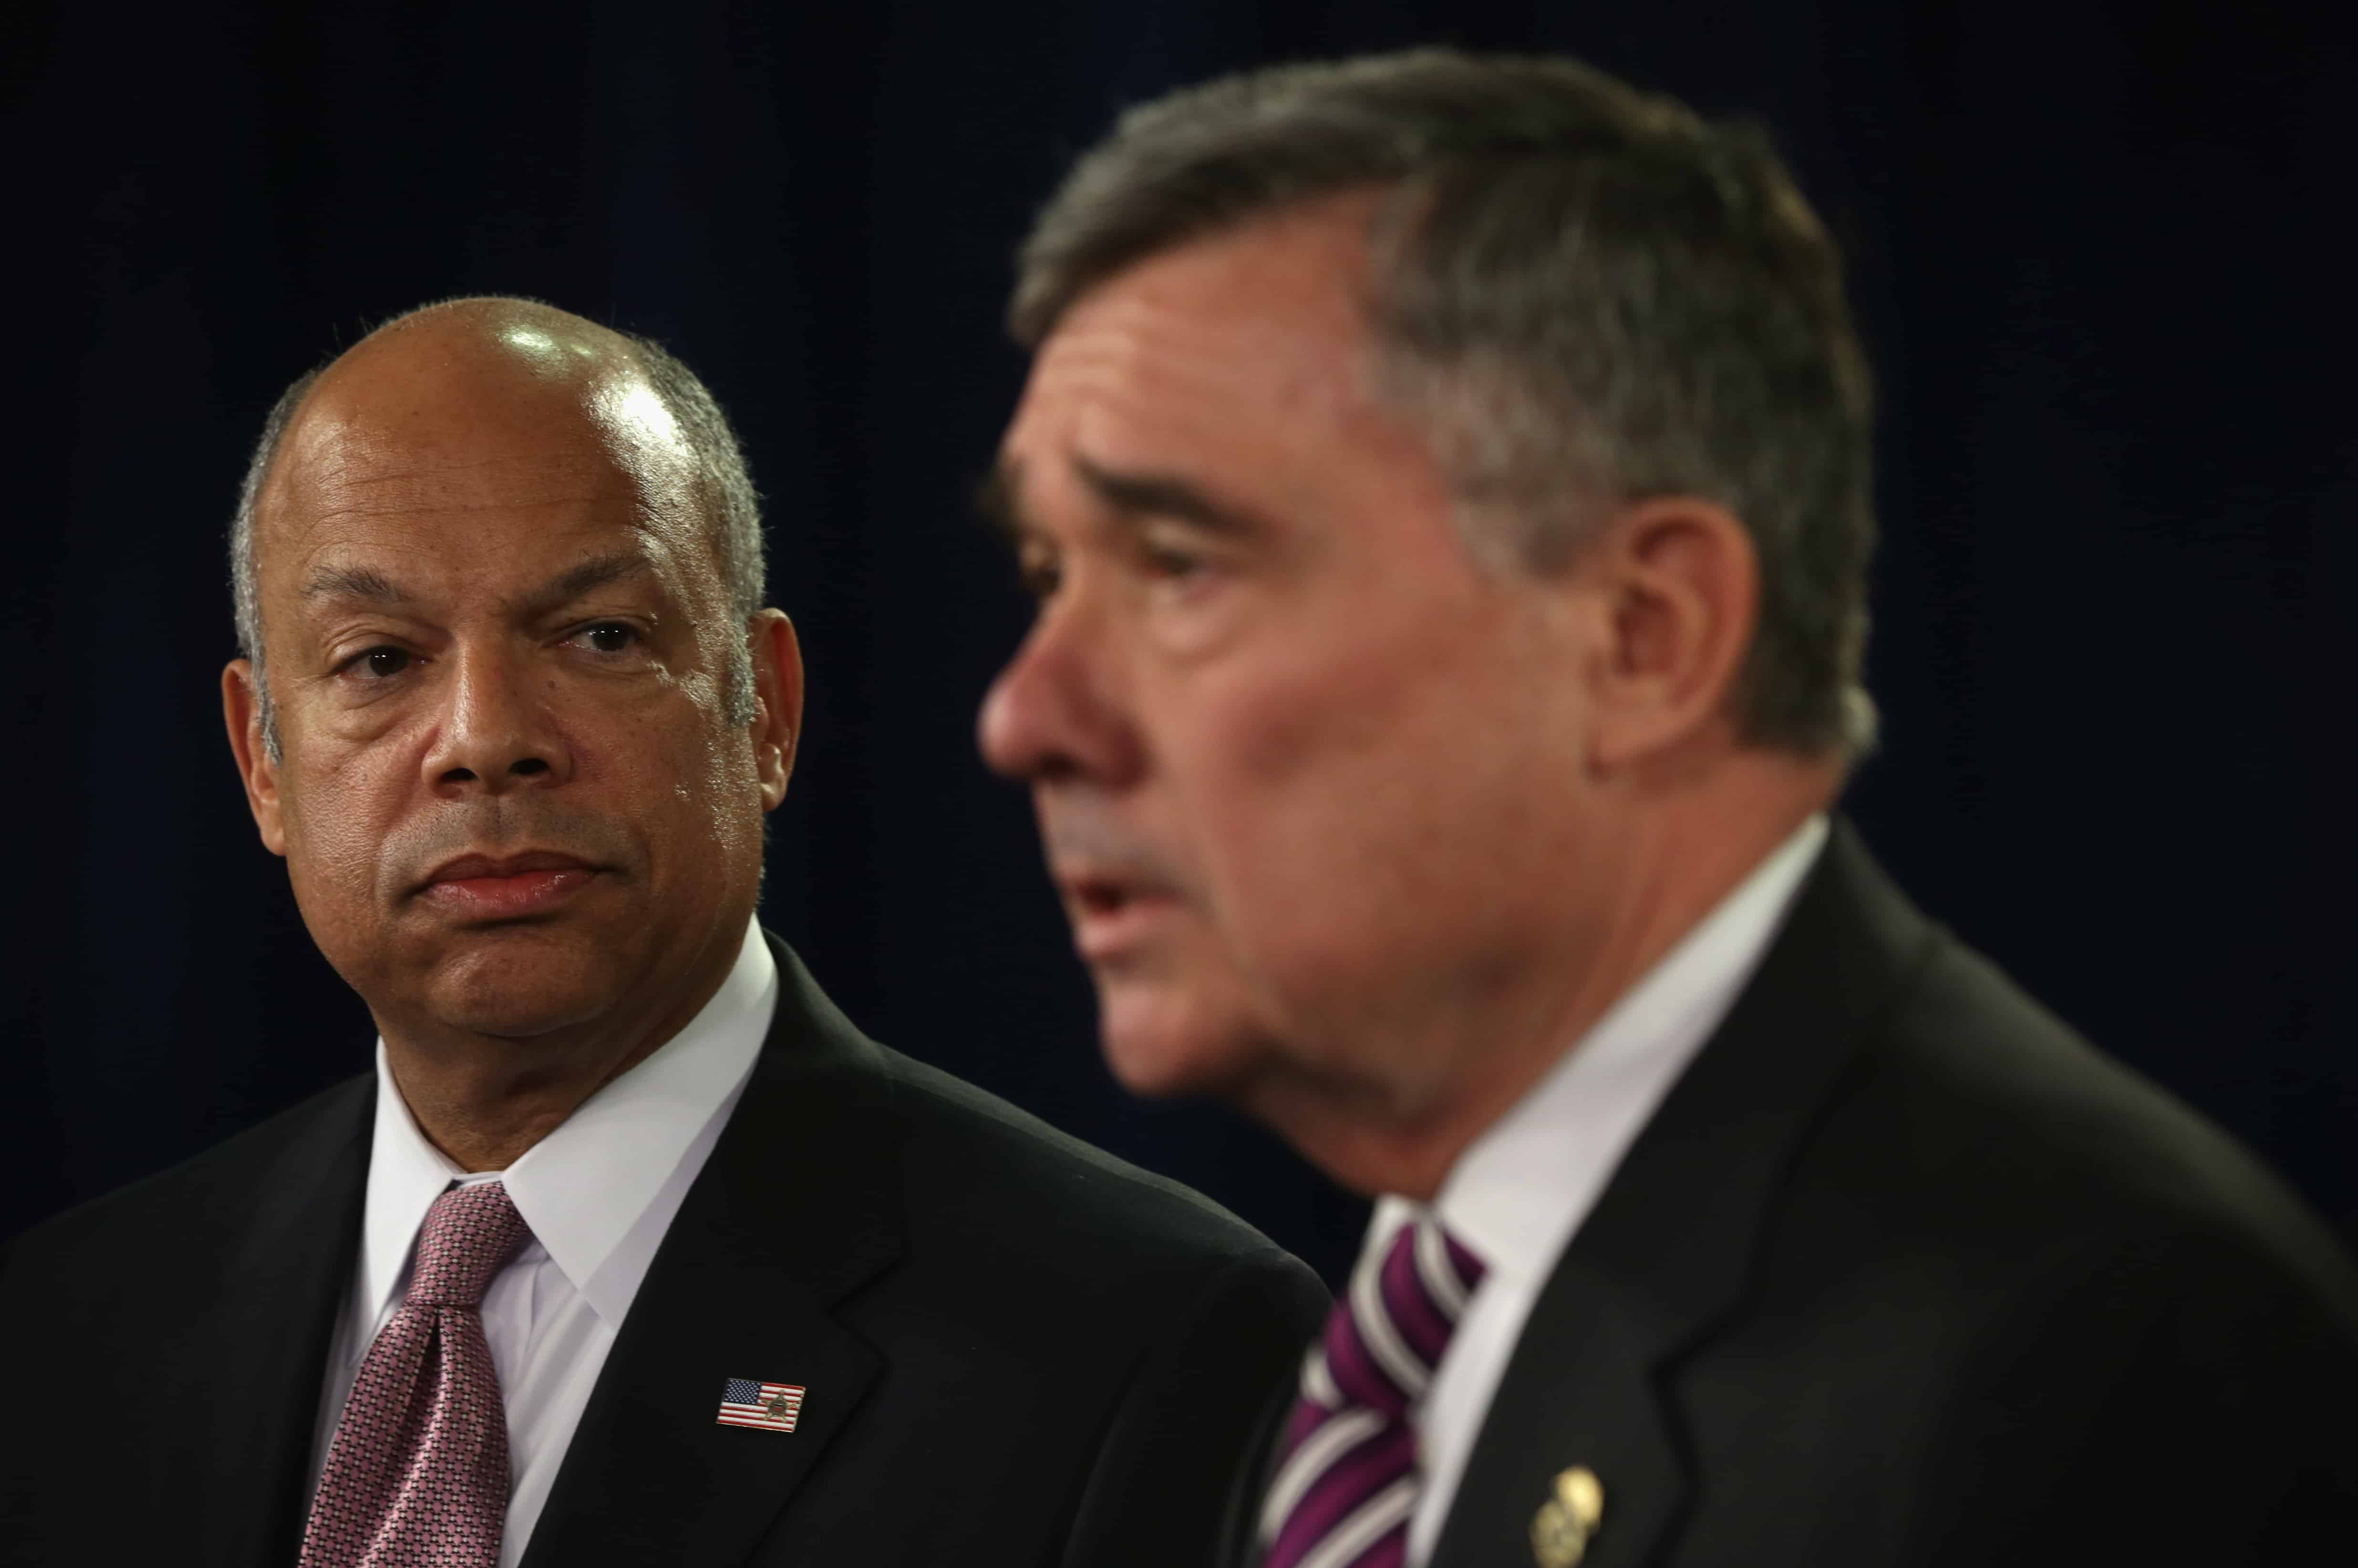 U.S. Secretary of Homeland Security Jeh Johnson (L) looks on as Gil Kerlikowske (R), Commissioner of U.S. Customs and Border Protection, speaks during a news conference February 23, 2015 in Washington, DC.